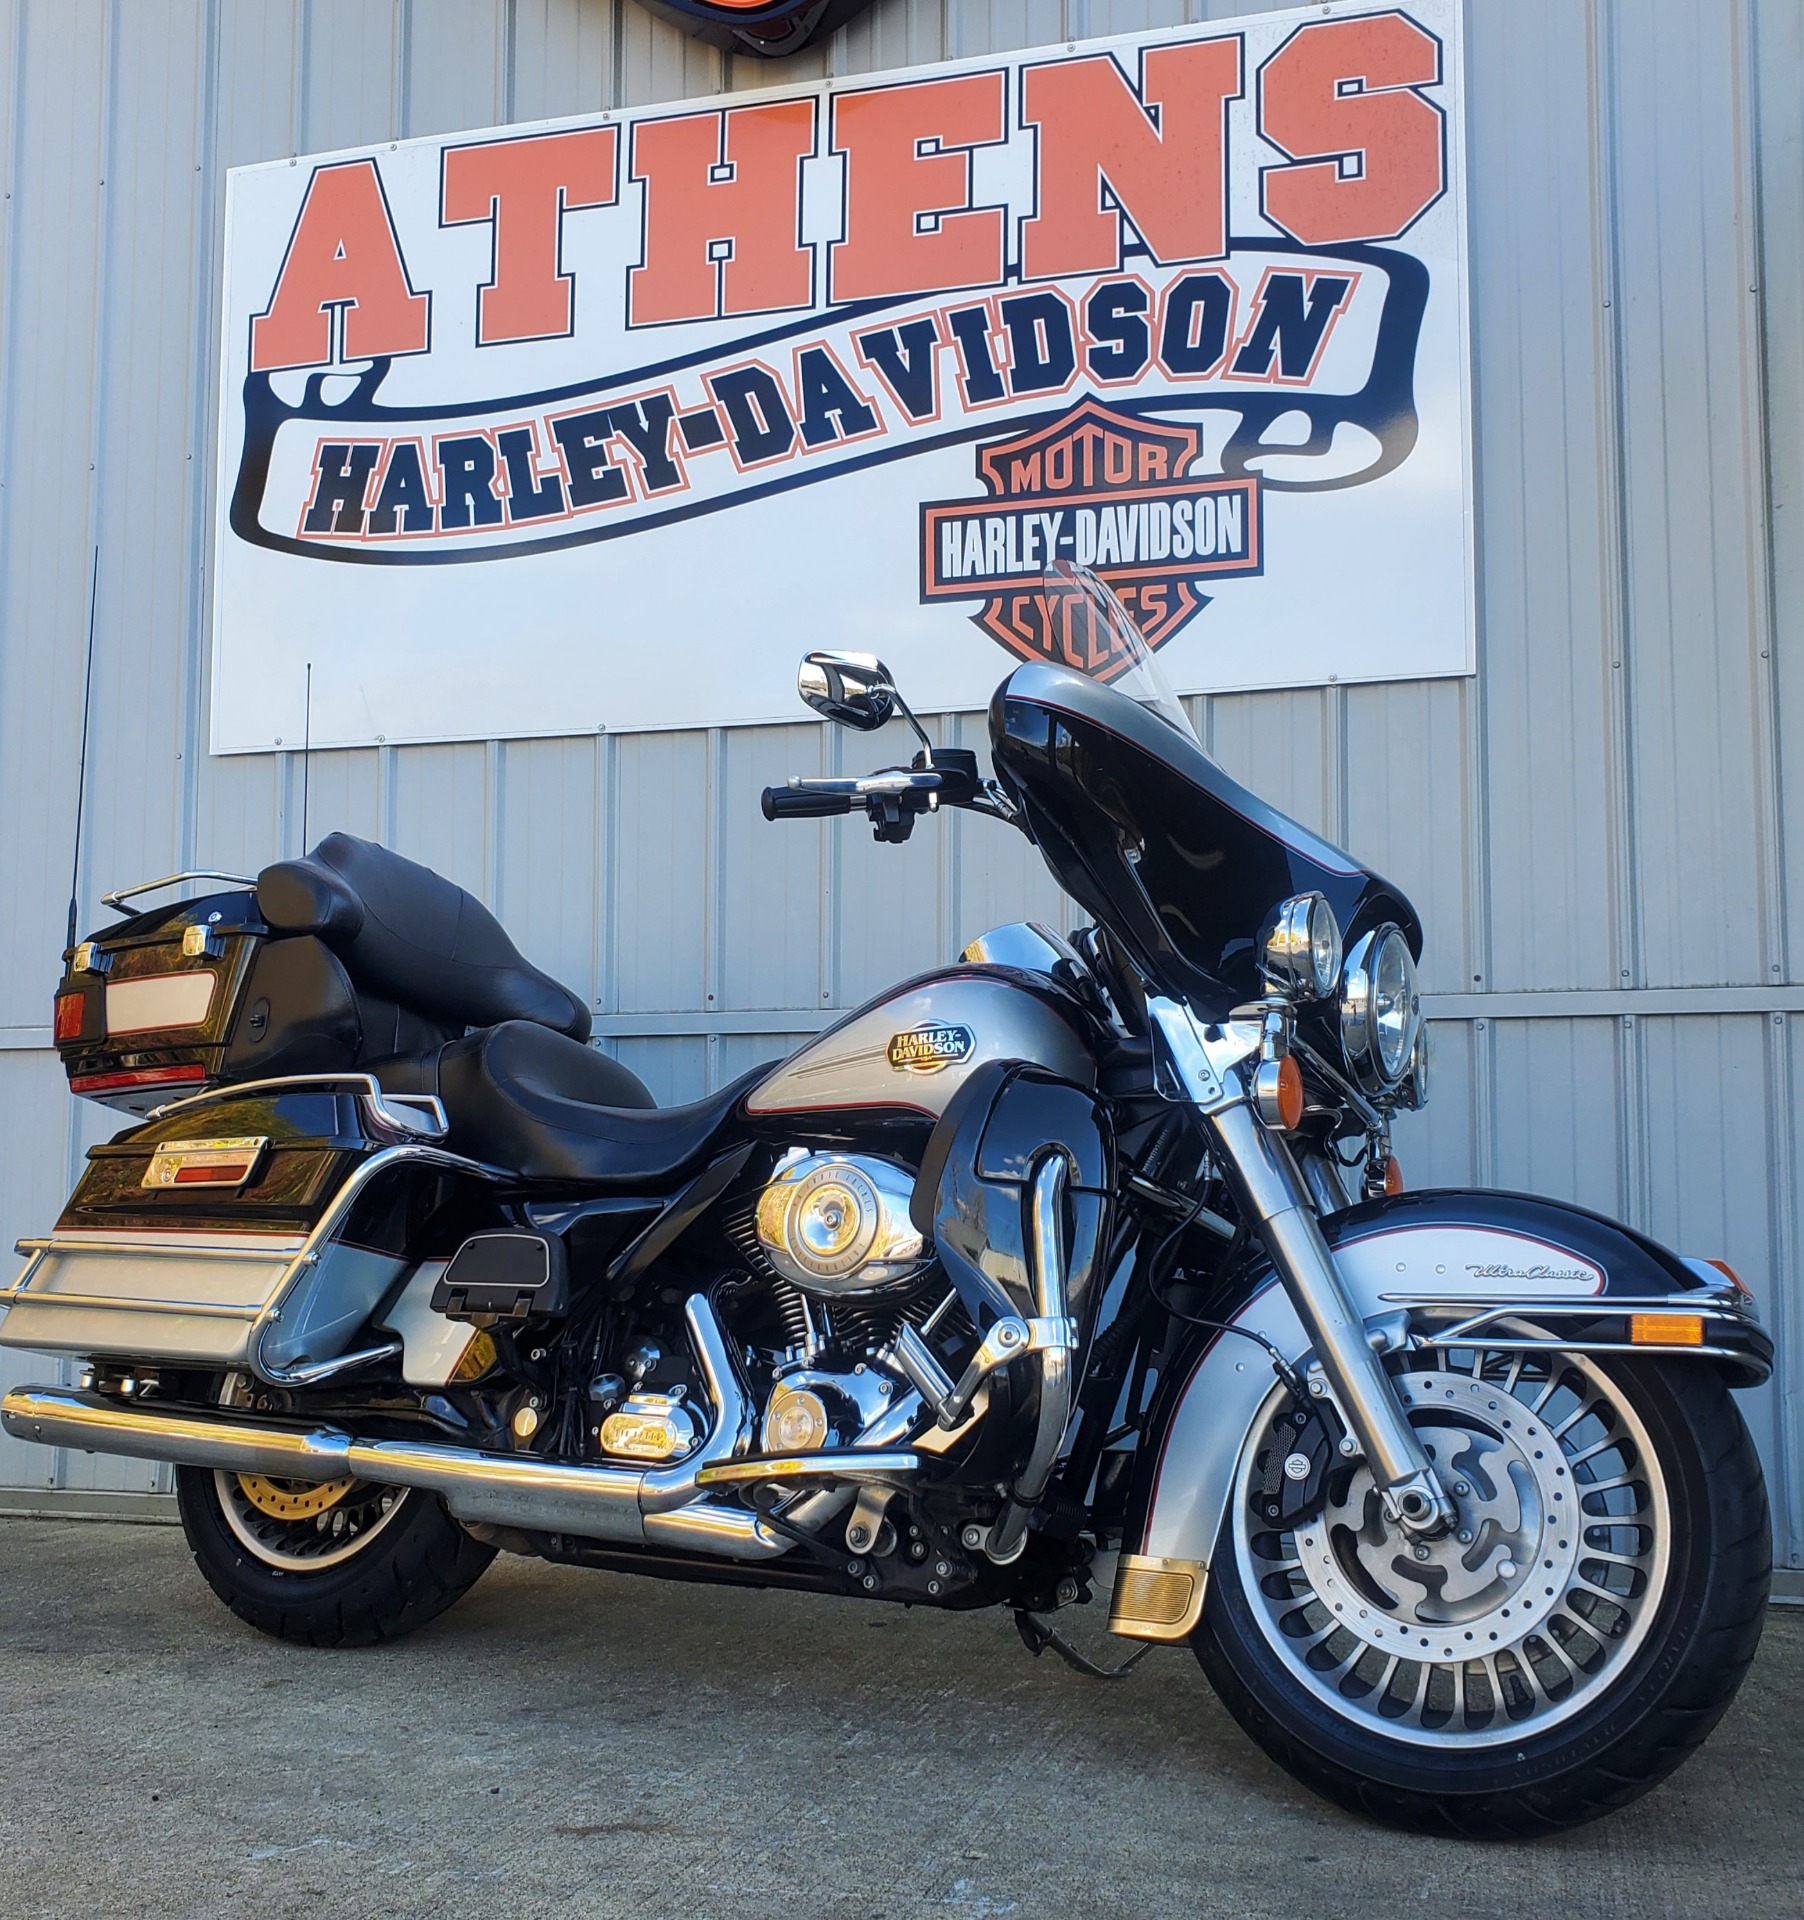 2010 Harley-Davidson Ultra Classic® Electra Glide® in Athens, Ohio - Photo 1